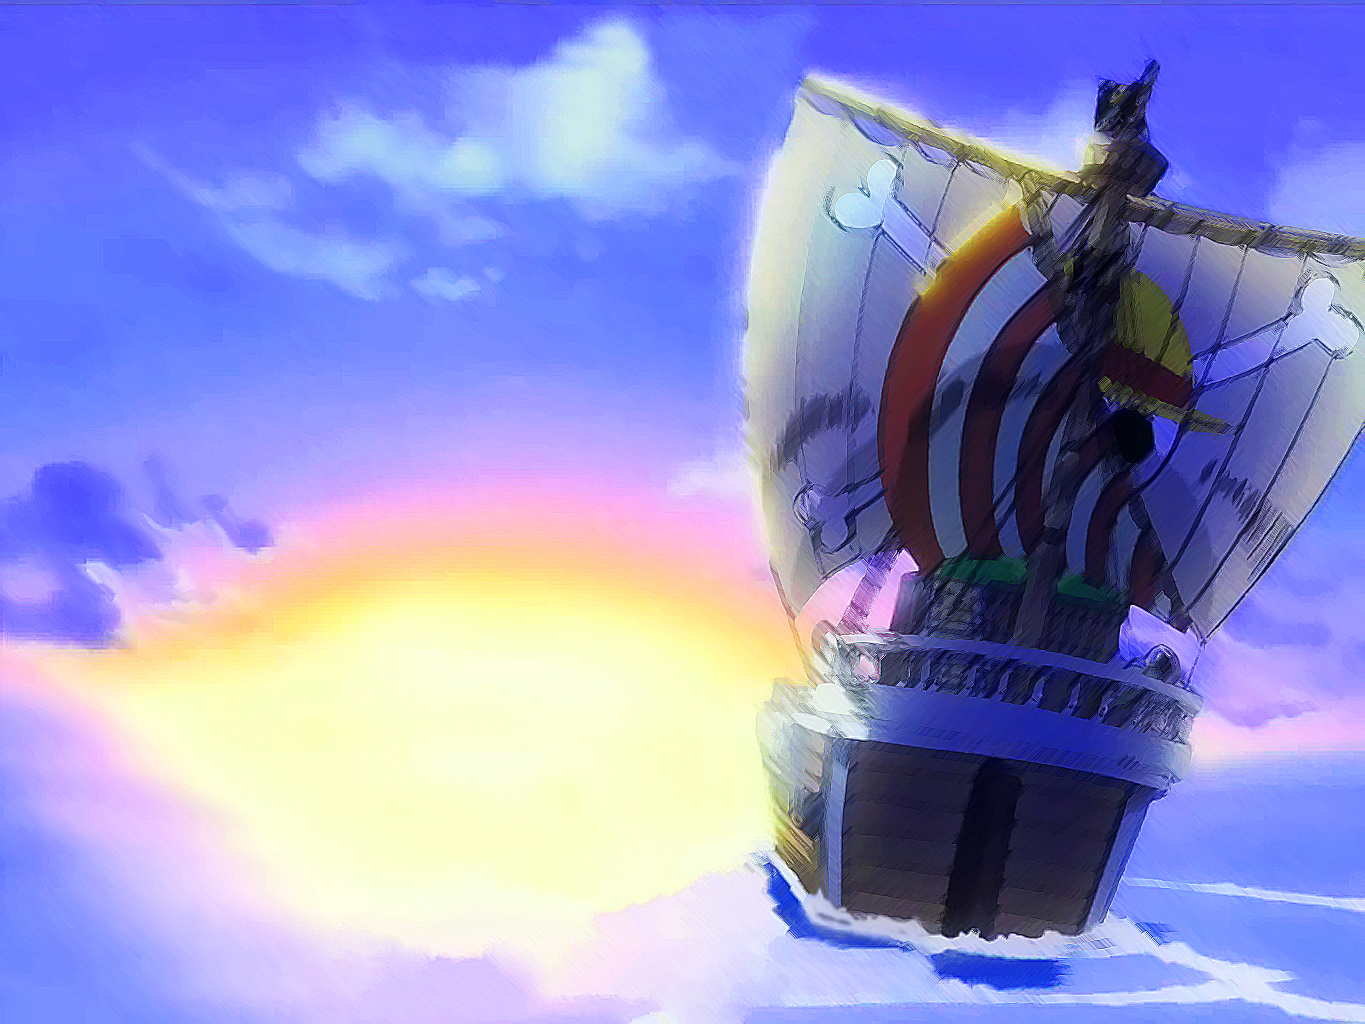 Going Merry ♥ - ONE PIECE Fanpage